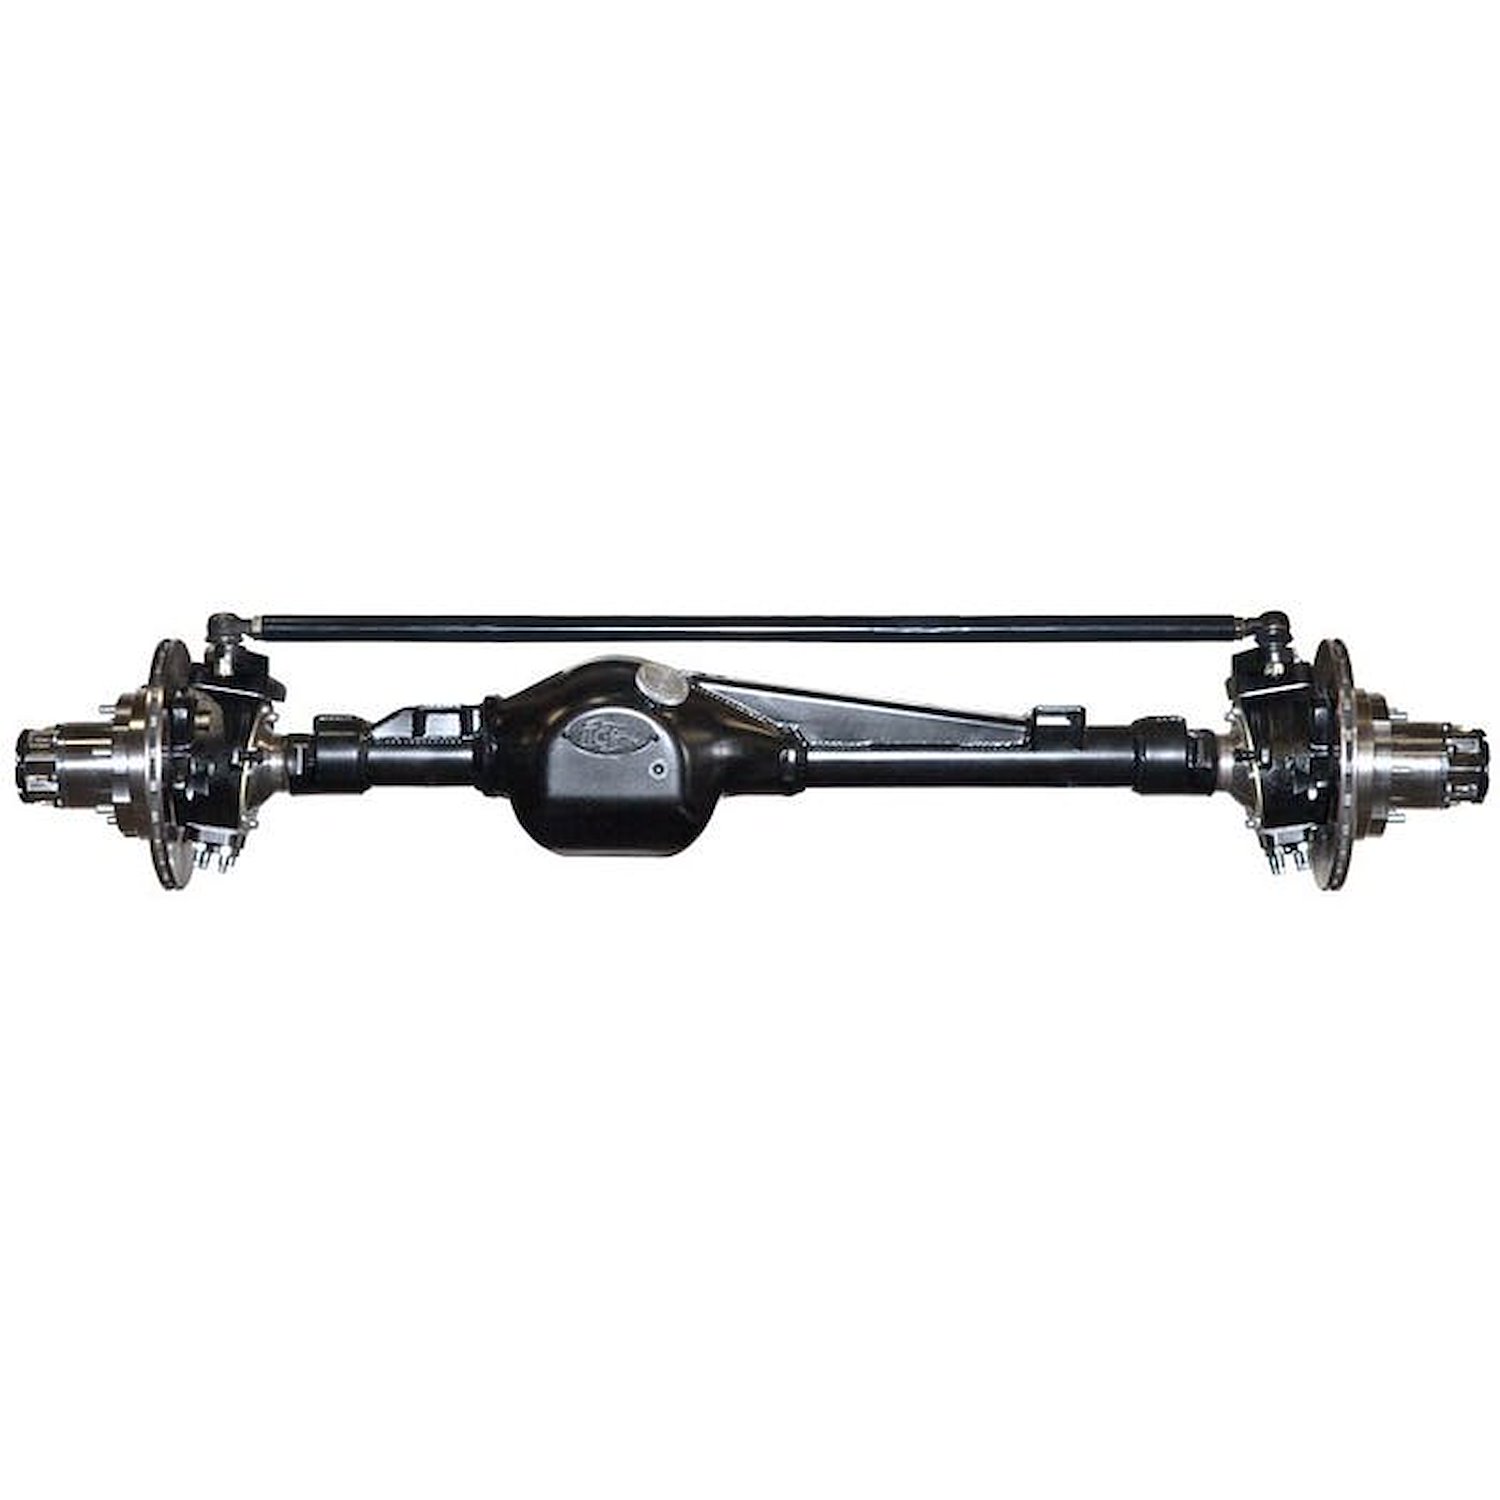 301644-1-KIT Rock Assault Fully-Built Front Axles, +5 Width, LHD, 4-Cylinder, 5.29, Grizzly, Creeper Flanges, Toyota